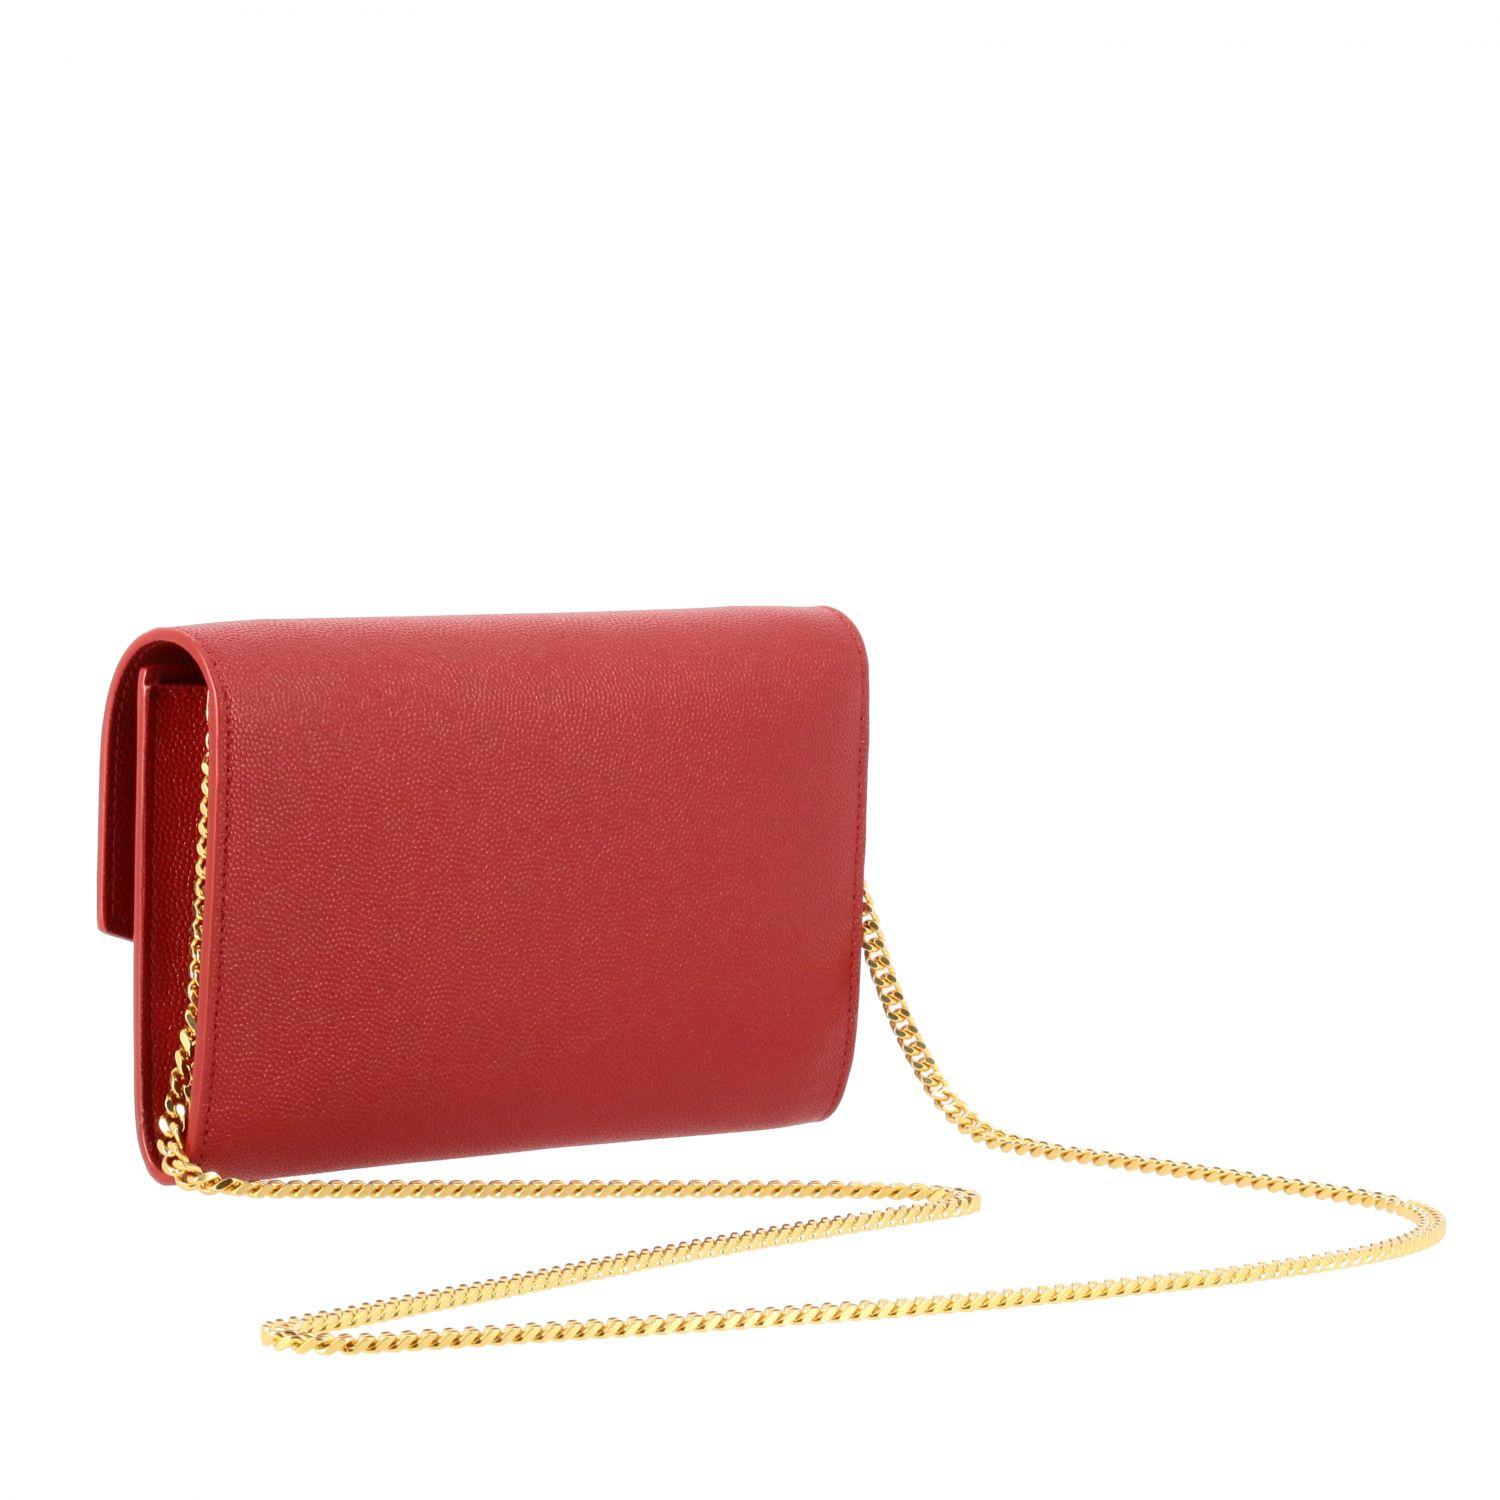 Ysl Red Grainy Leather Wallet on Chain